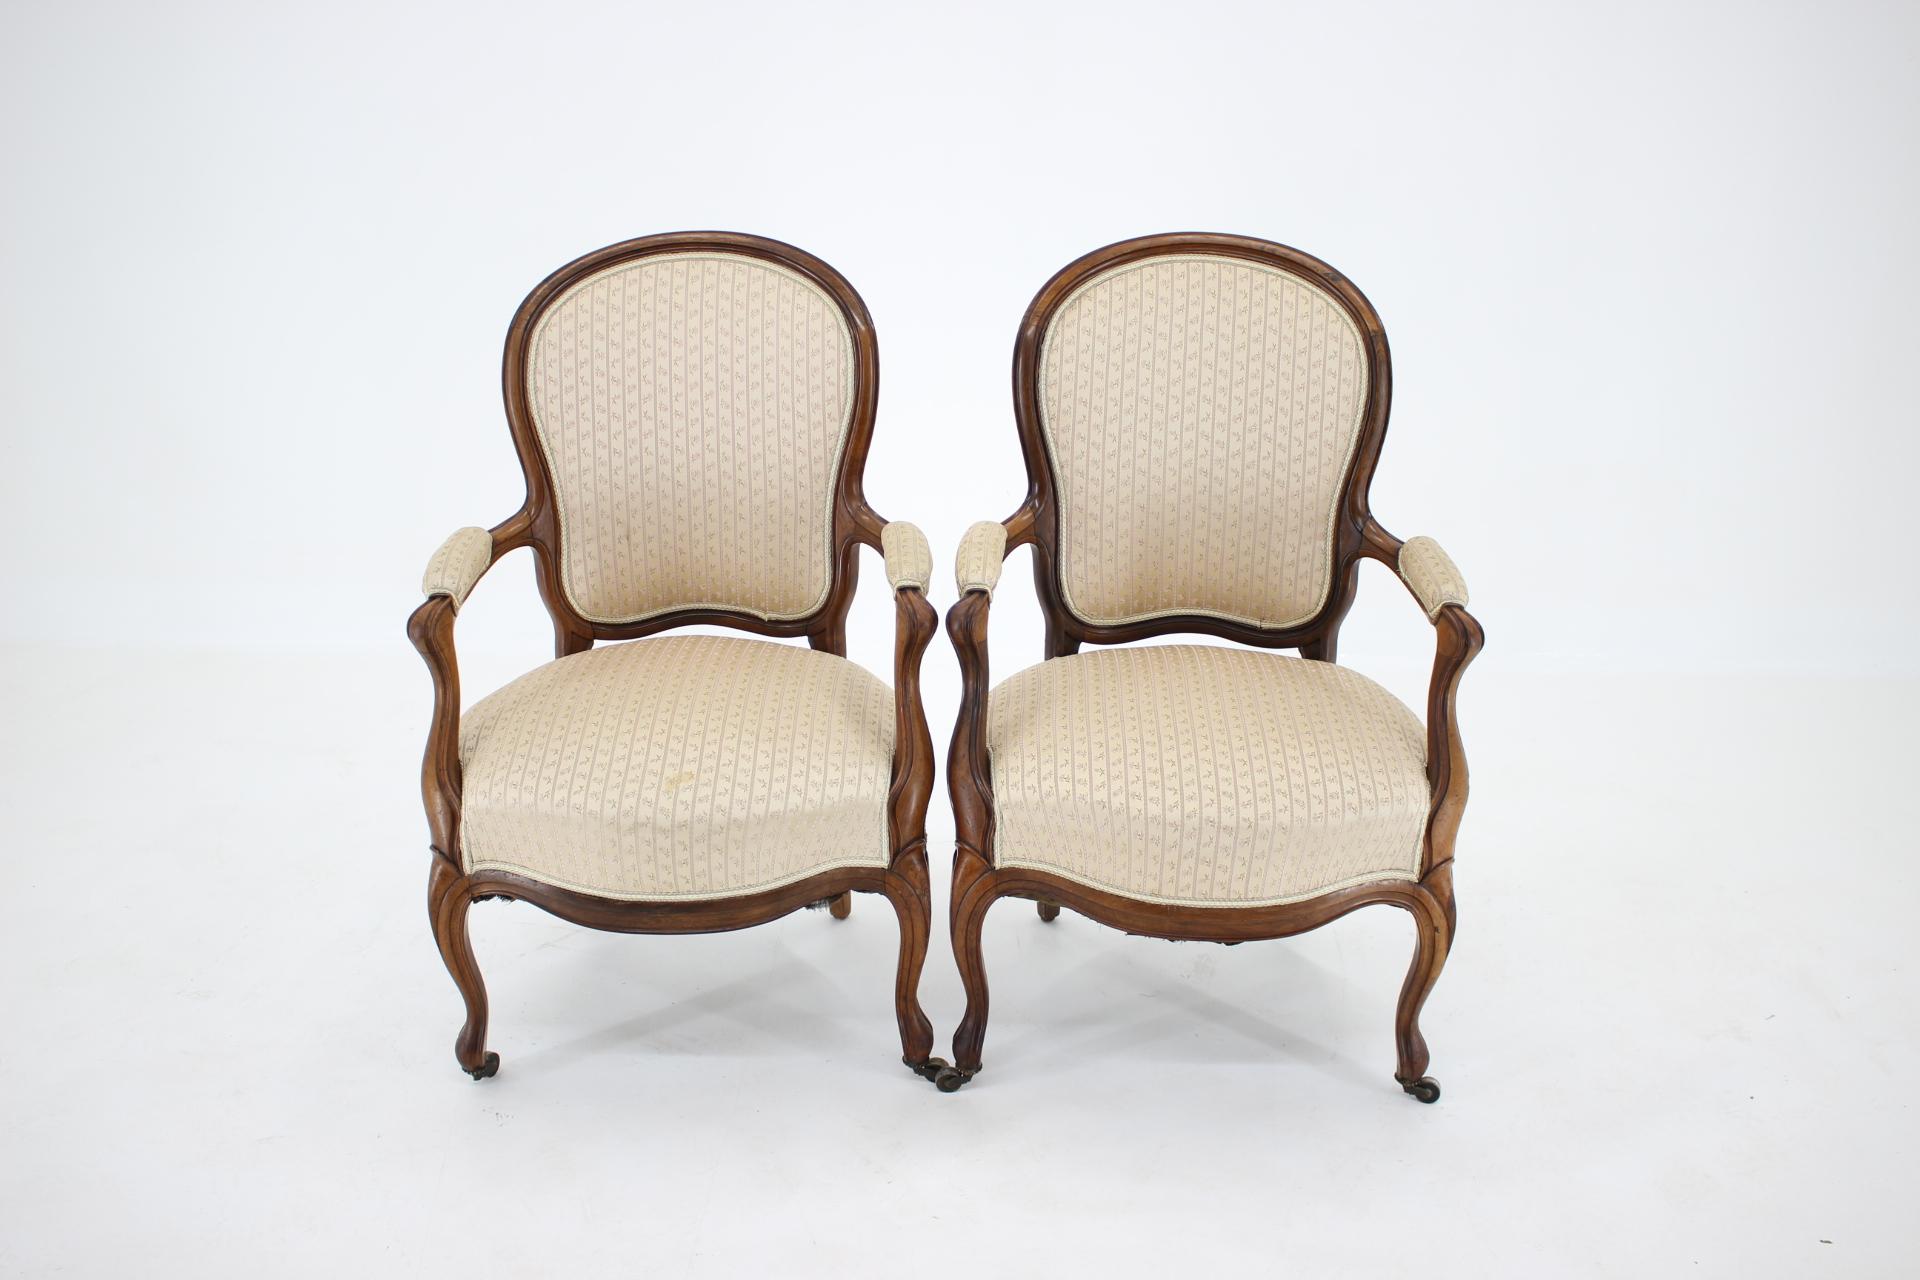 Early 20th Century 1900s Pair of Original Danish Rococo Chairs For Sale